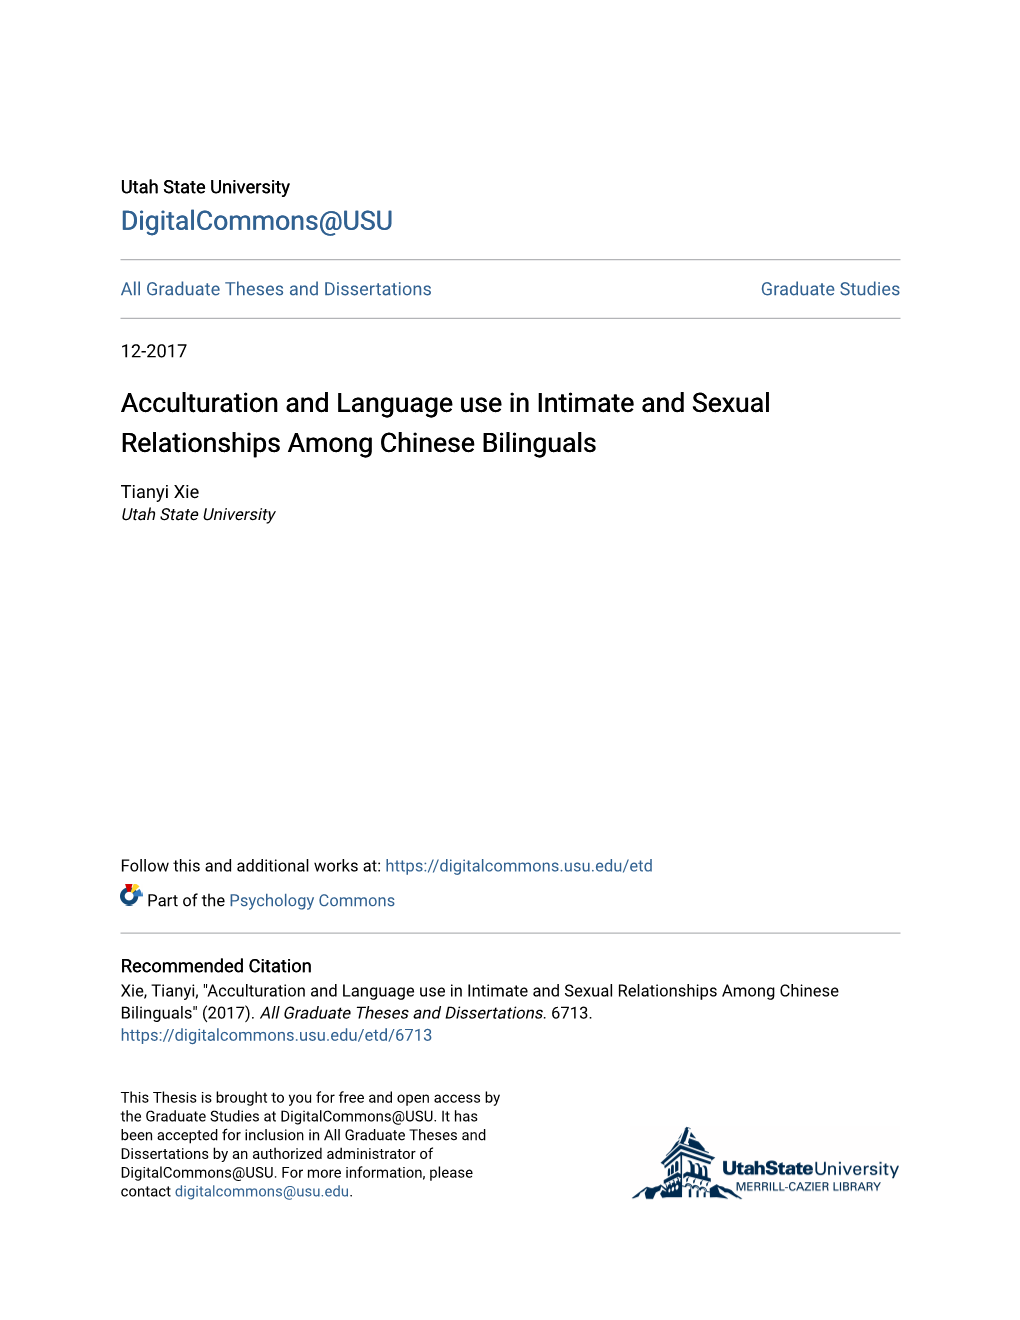 Acculturation and Language Use in Intimate and Sexual Relationships Among Chinese Bilinguals